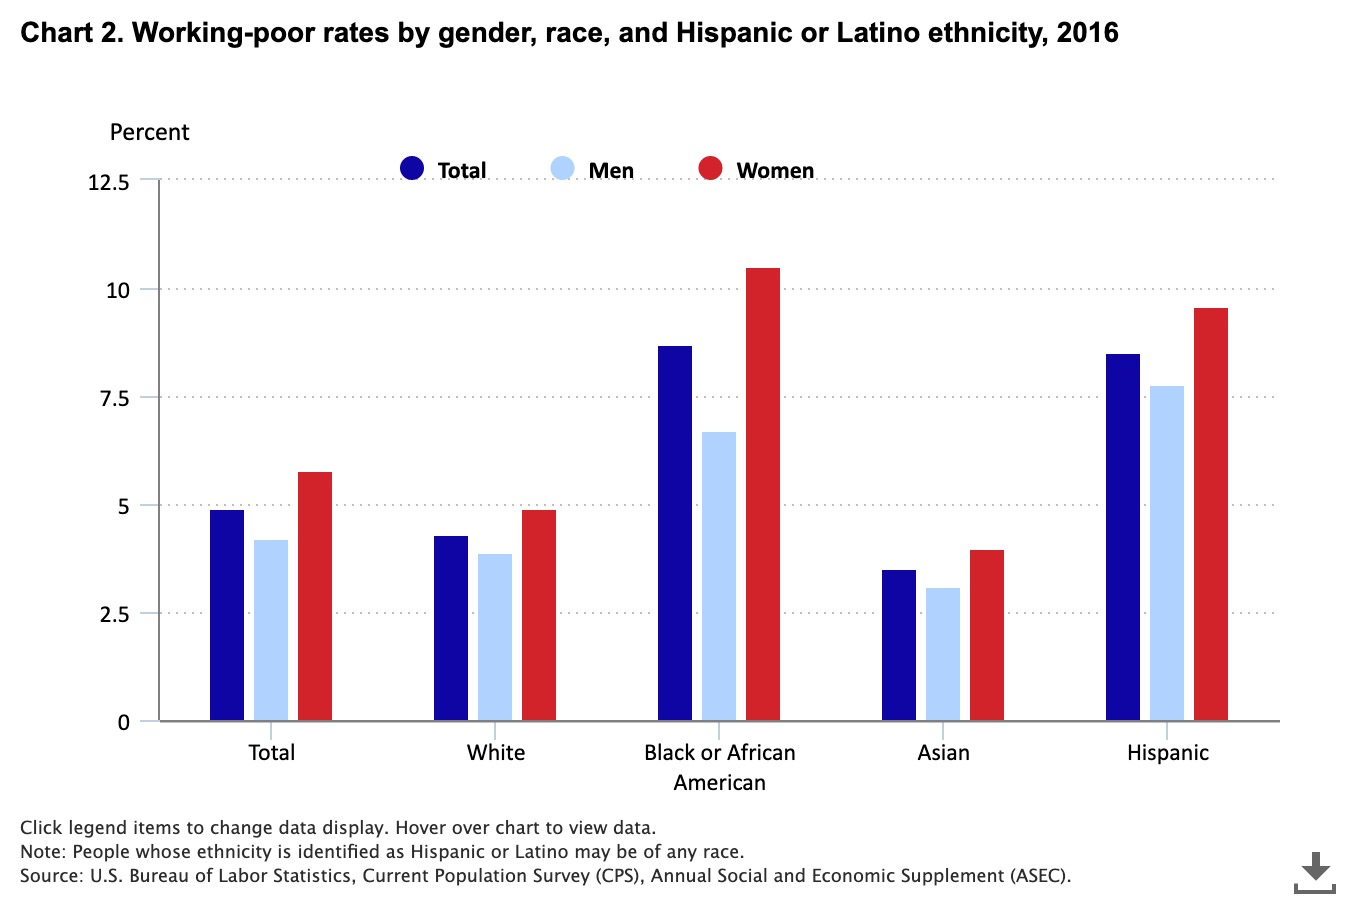 Working poor-rates by gender, race, and Hispanic or Latino ethnicity, 2016. It shows that total rates of working poor for everyone was around 5%, but slightly higher for women. This difference is exaggerated for Hispanic women, and especially for black or African-American women.